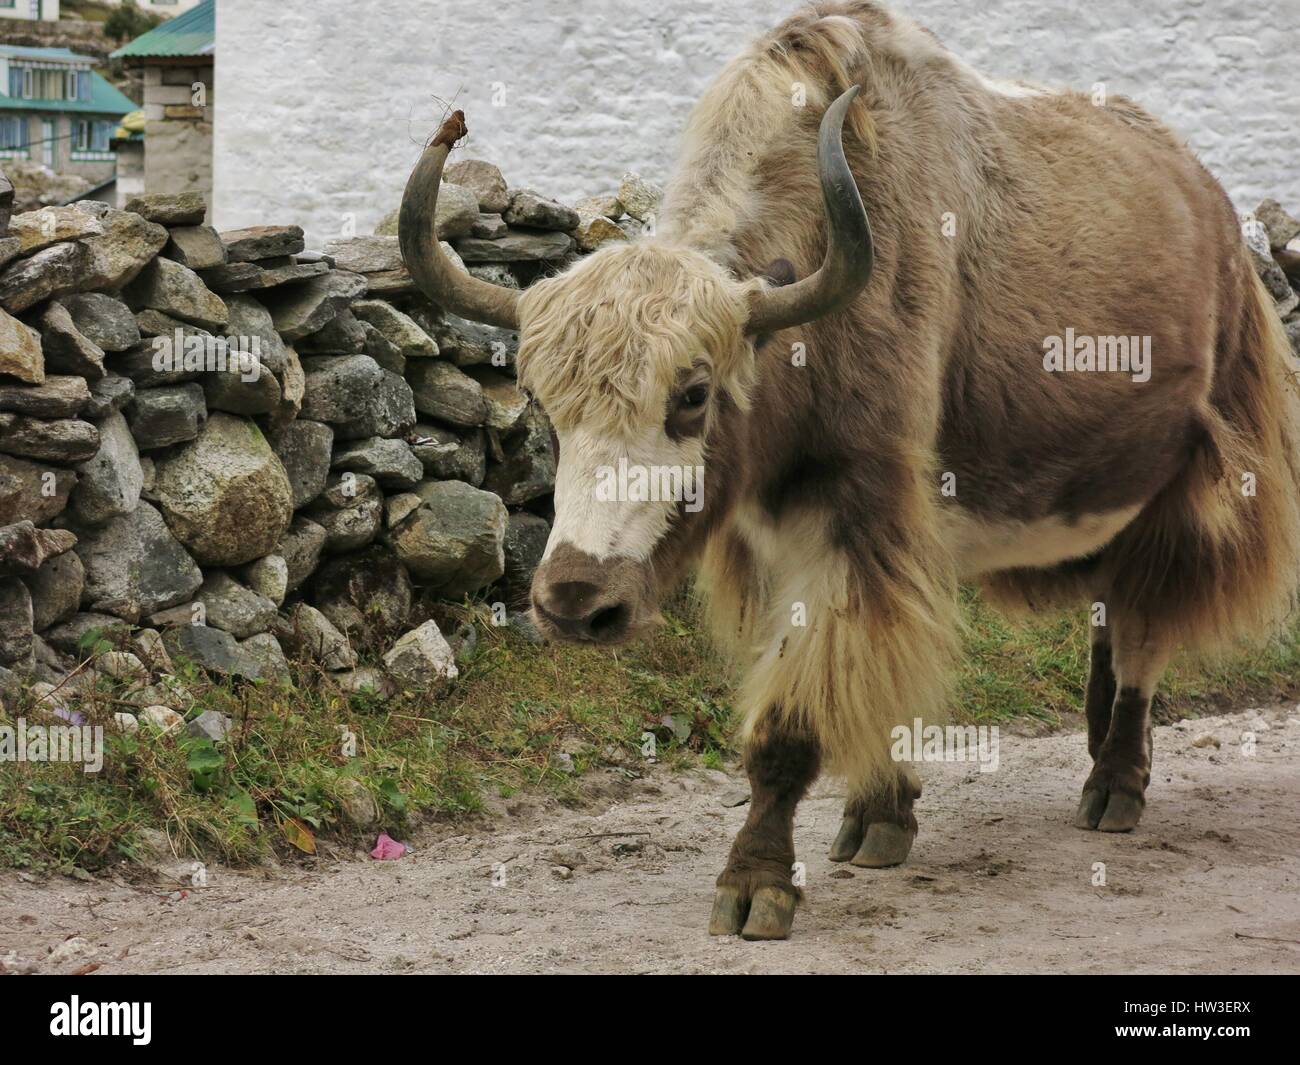 Brown white yak photographed in Khumjung, Nepal. Stock Photo